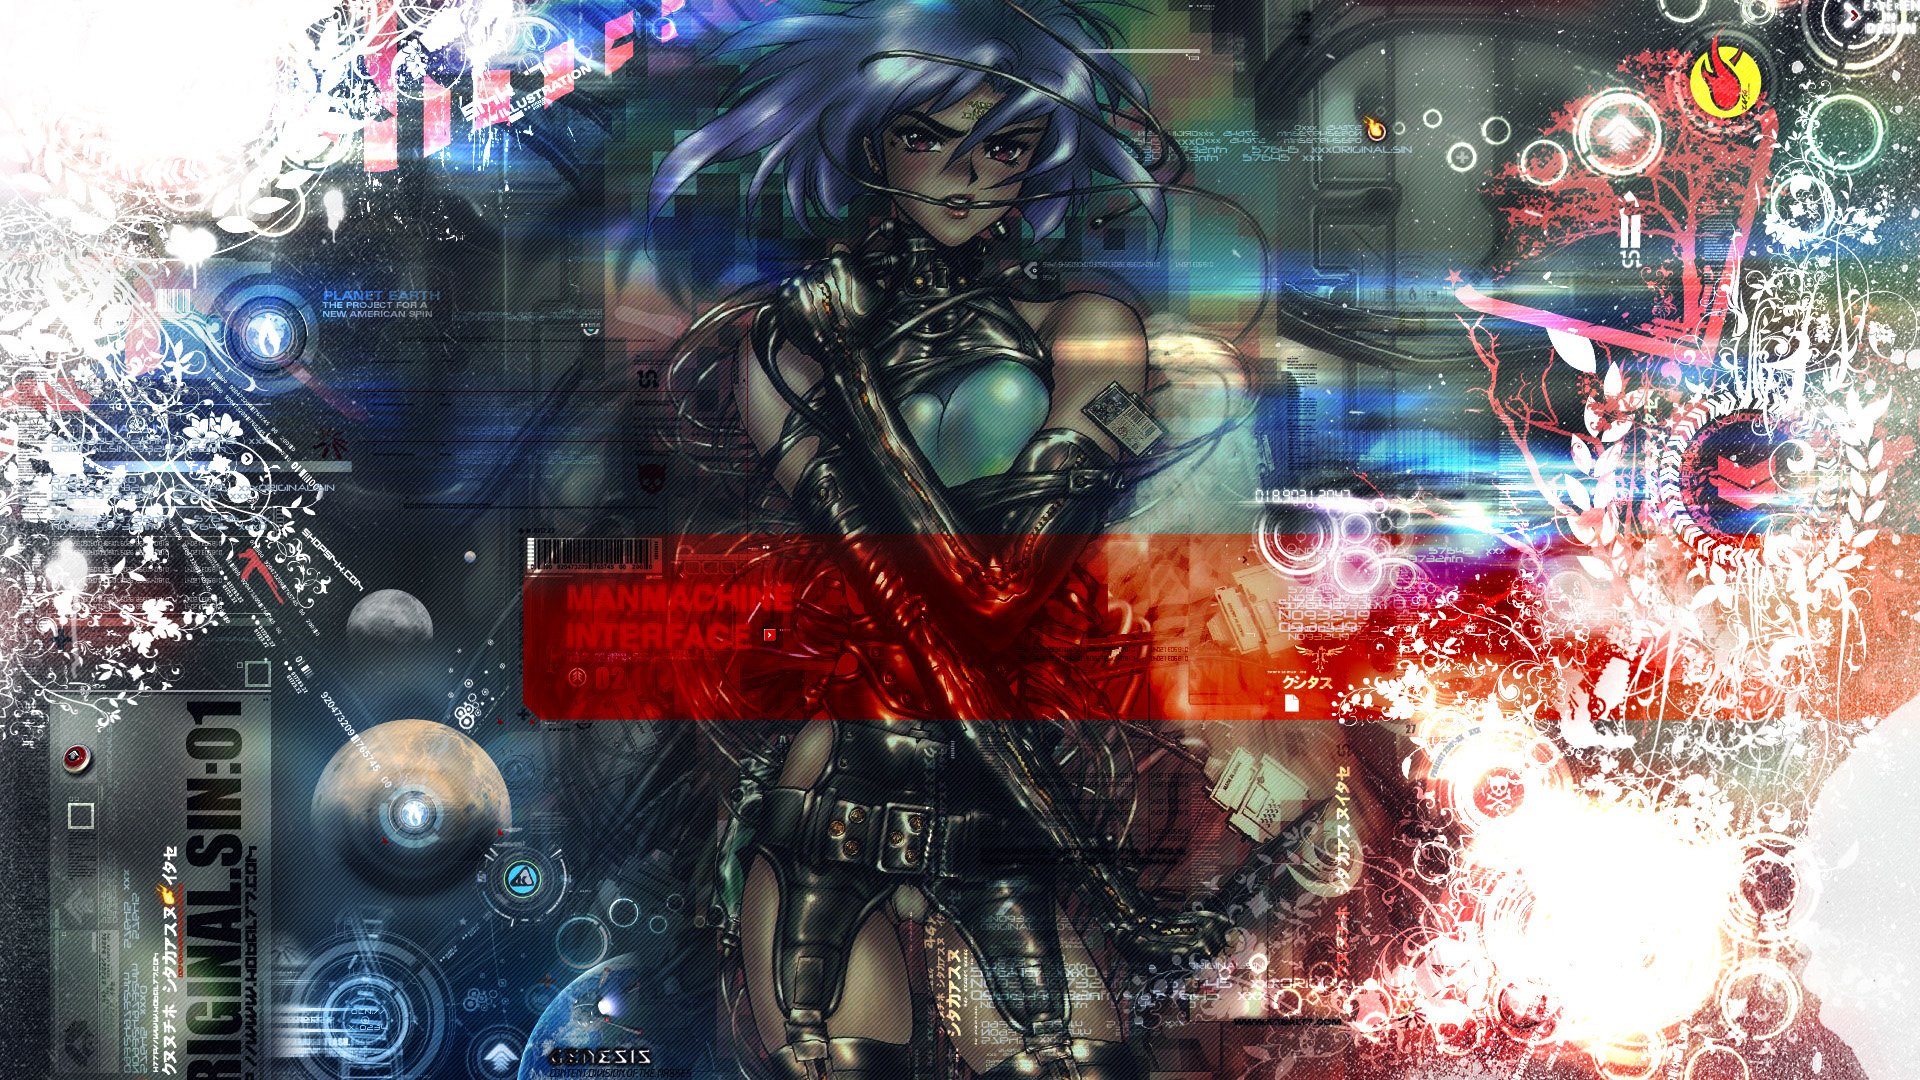 ghost in the shell wallpaper hd,action adventure game,graphic design,cg artwork,illustration,fictional character